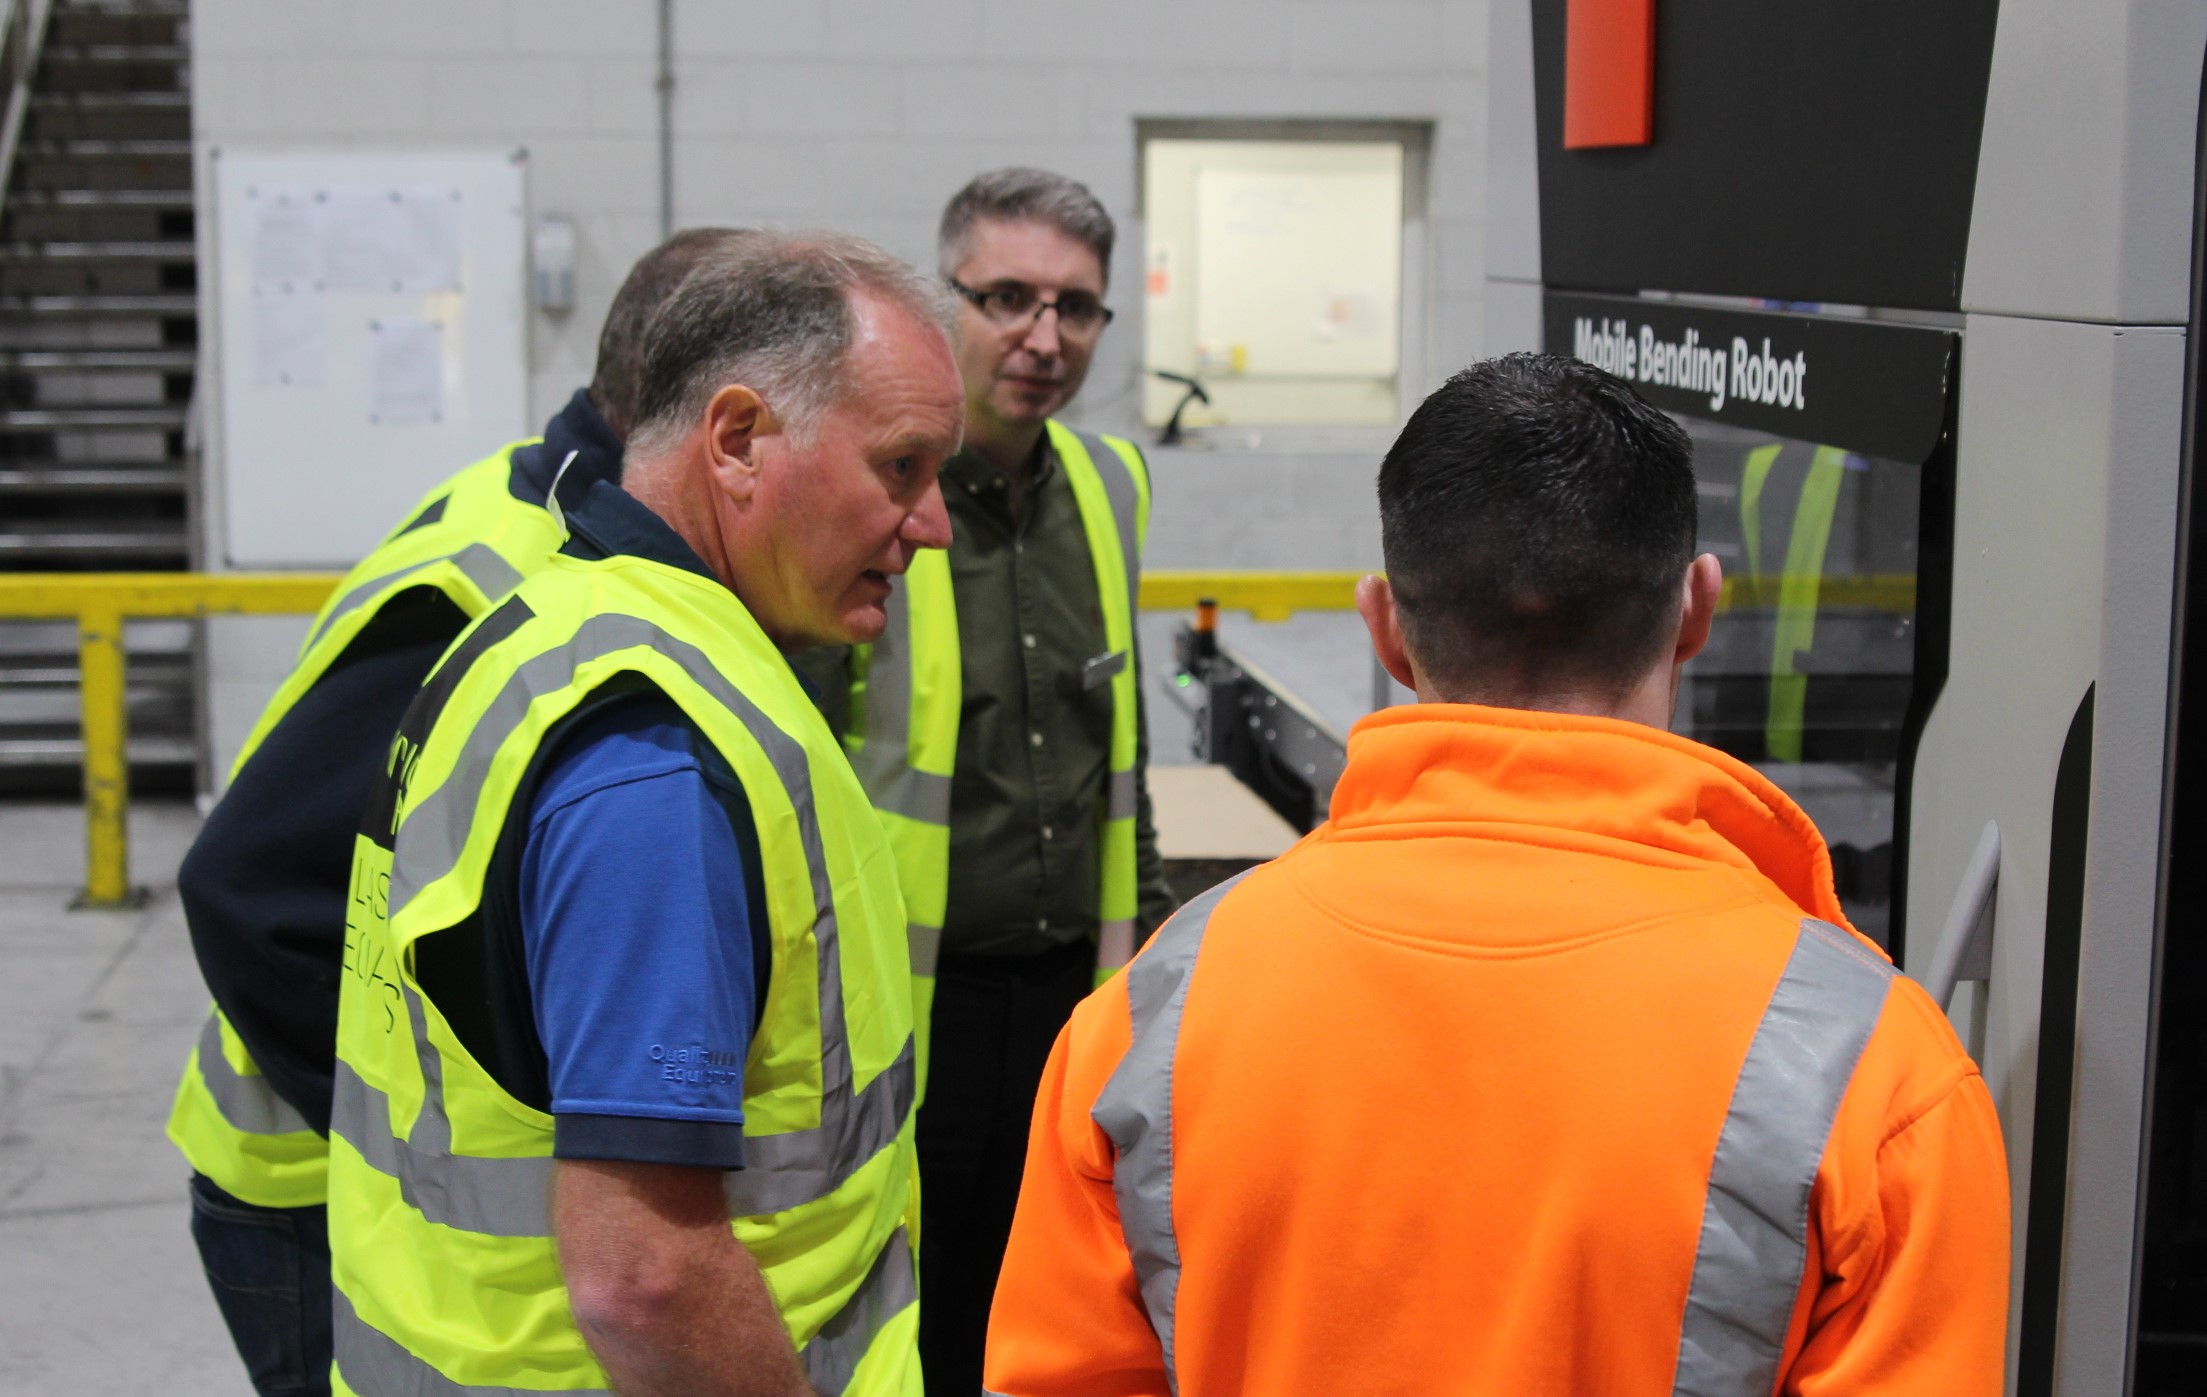 Wrightform Ltd Hosts Exclusive Open-Days, Showcasing State-of-the-Art Facility